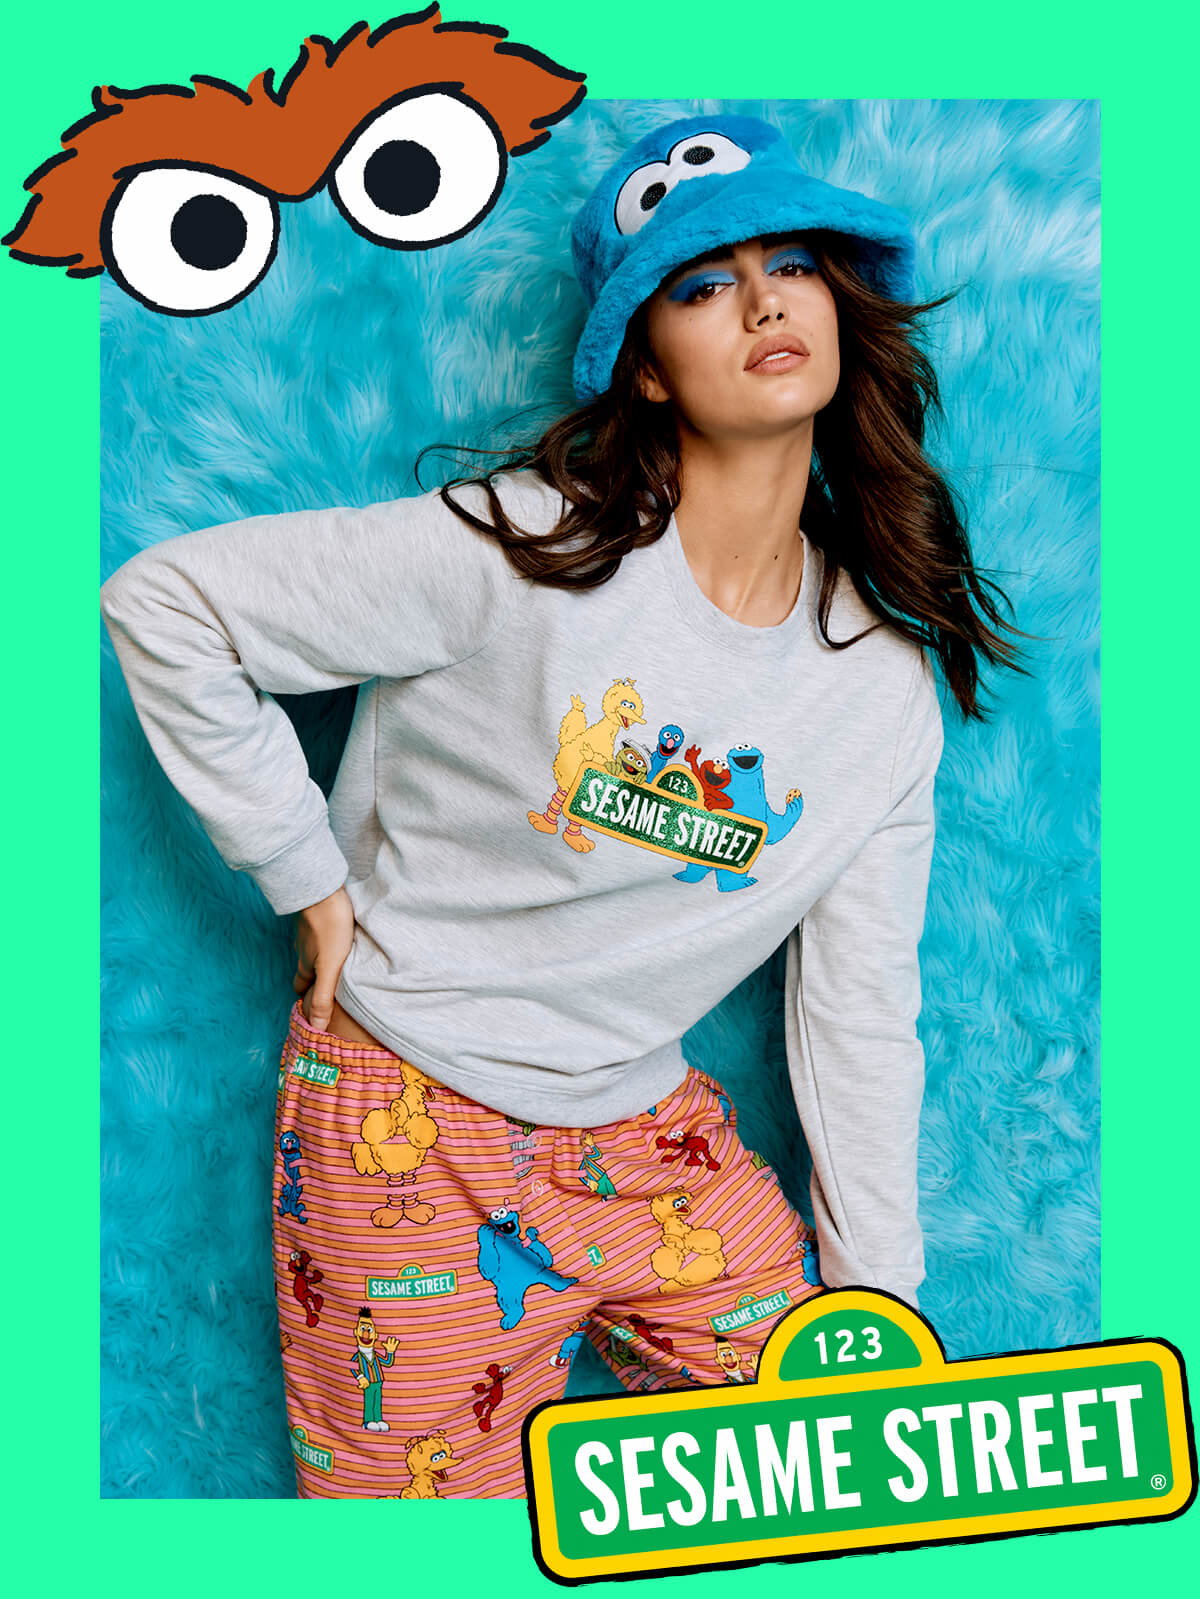 Peter Alexander: New Sesame Street Collection is fun for all!